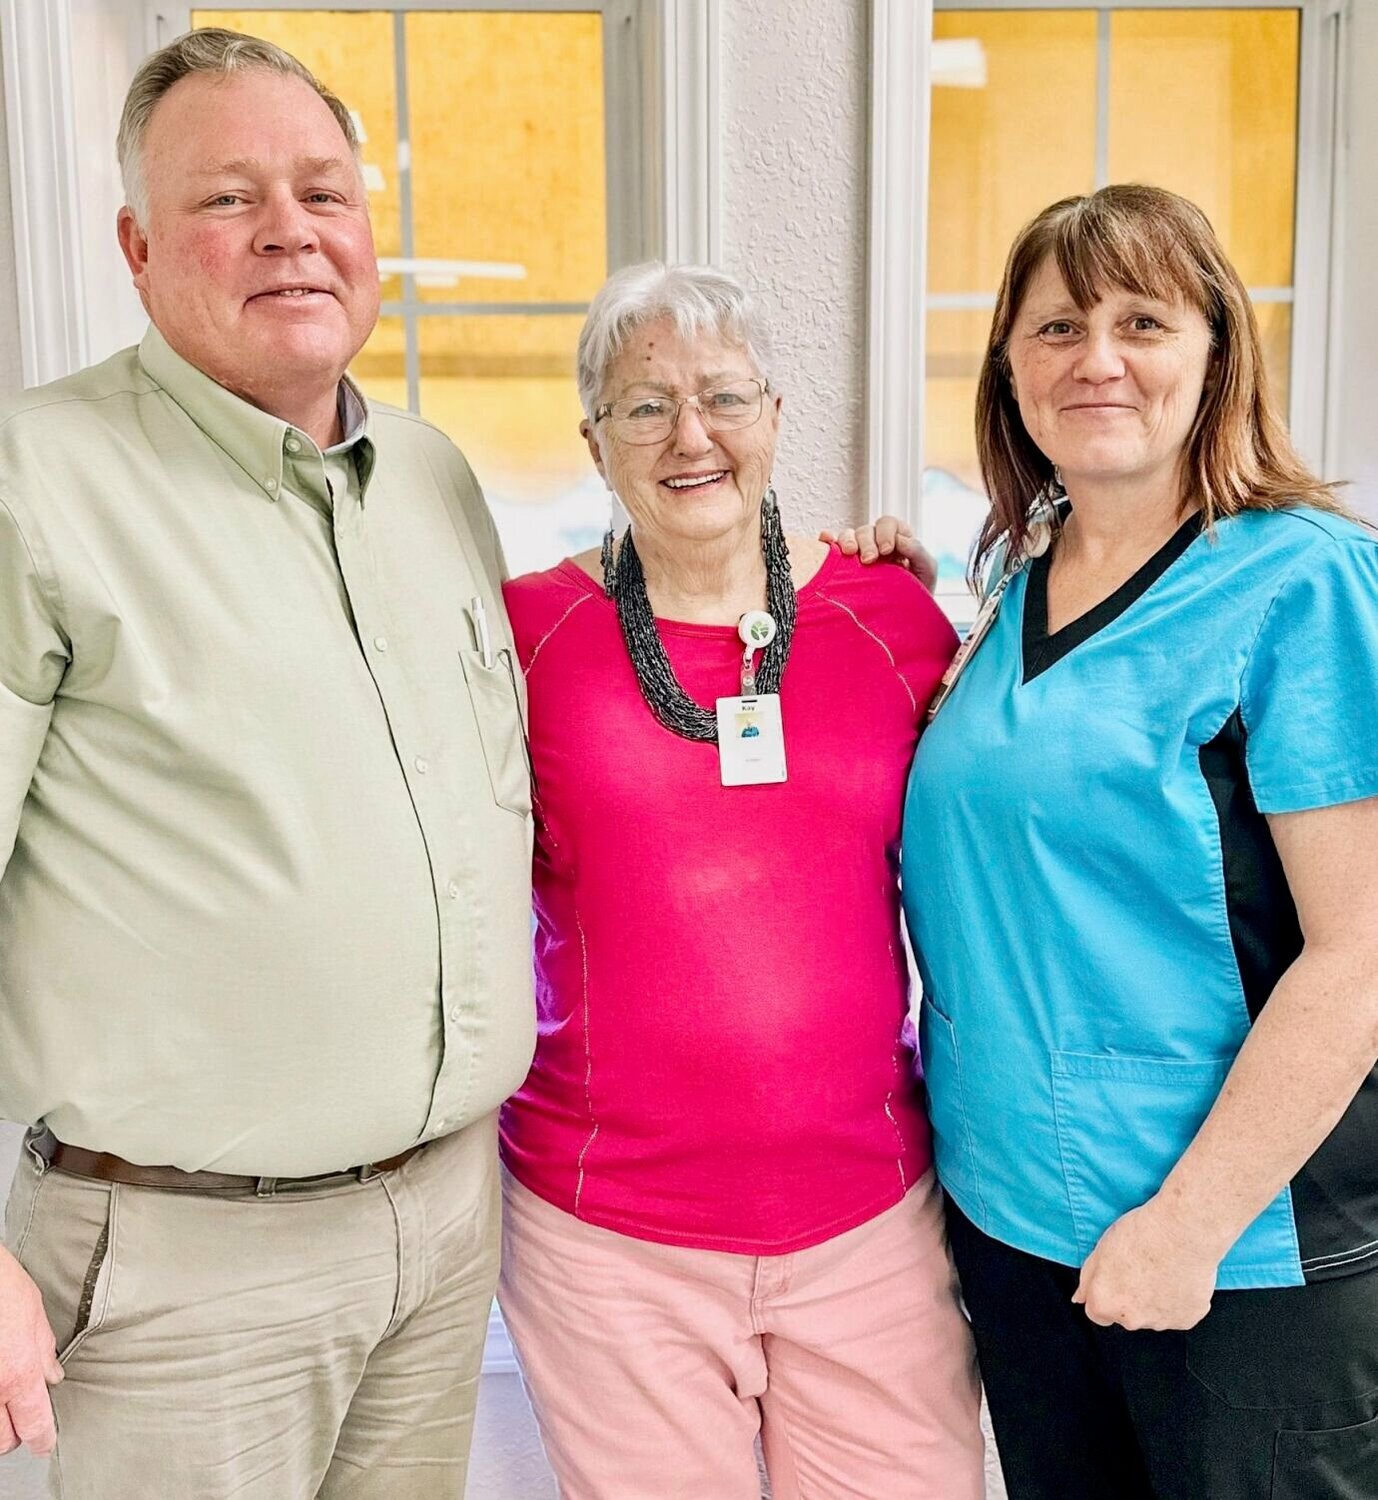 Kay “Katie” Dowler, center, stands with with Tammy McCall, social worker, right, and Eric Bowman, hospice chaplain, at Ozarks Healthcare At Home: Hospice.